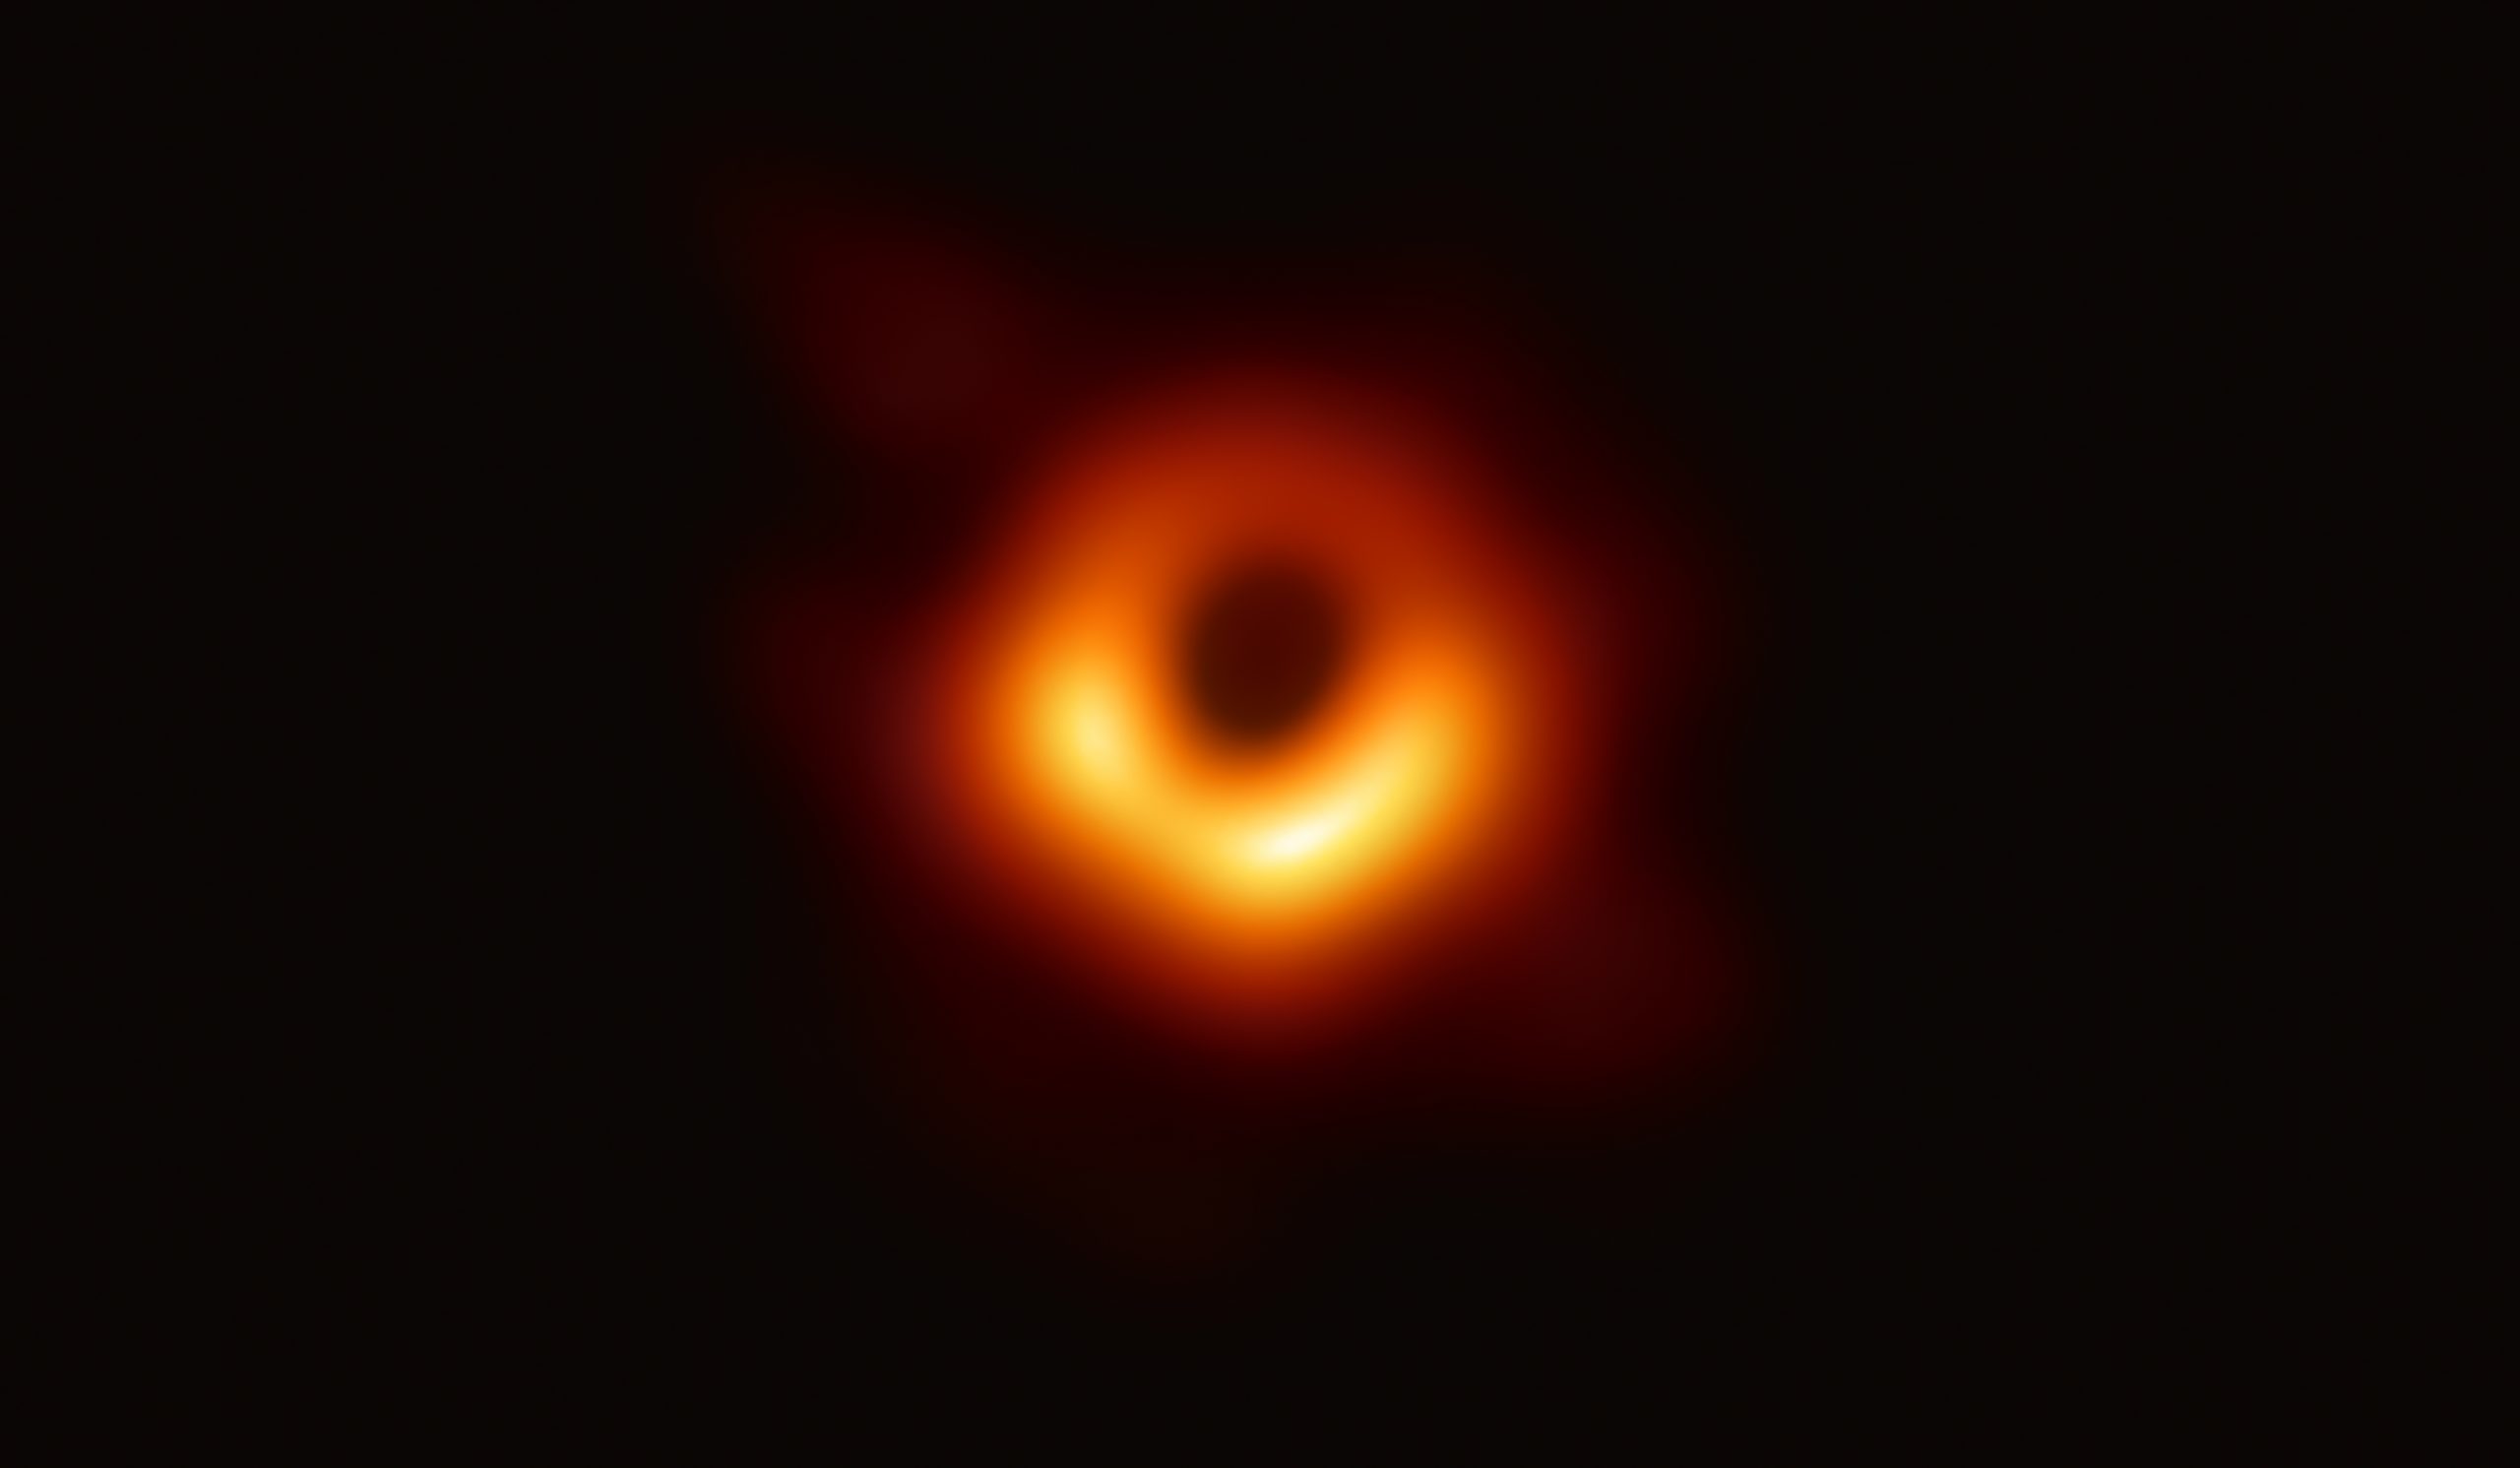 Actual image of a super massive black hole a the heart of the Messier 87 Galaxy